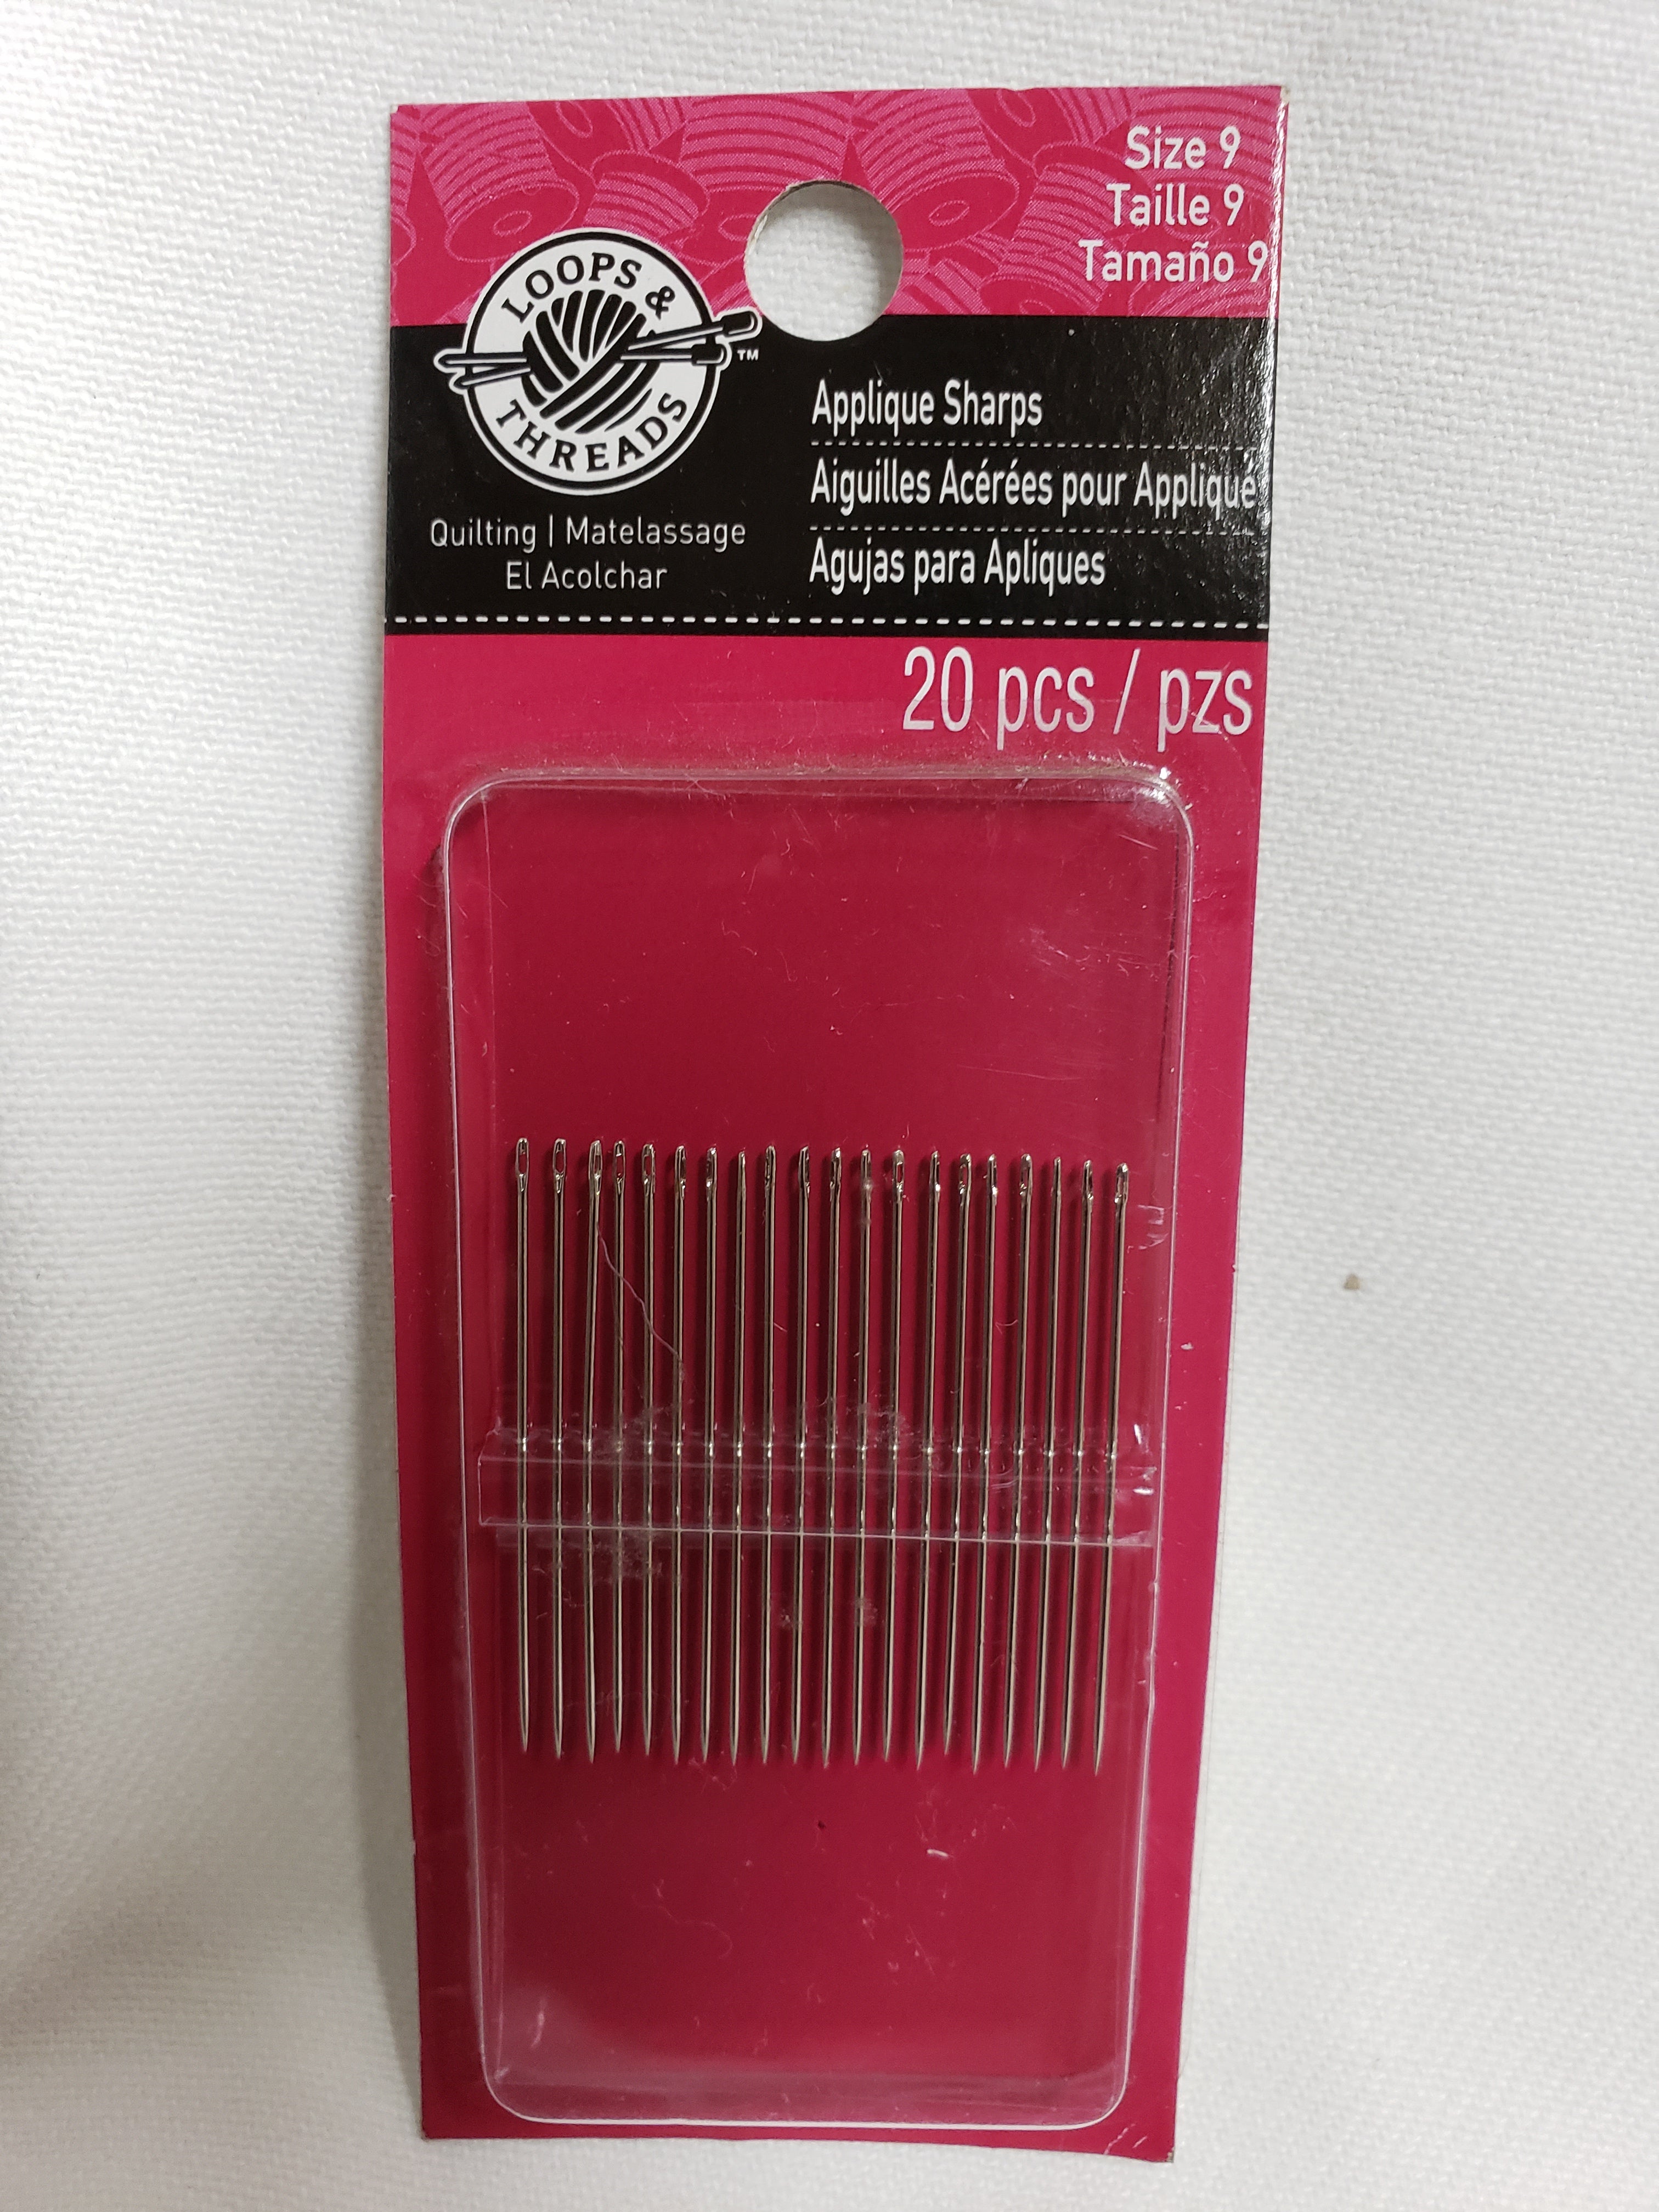 Applique Sharps sewing needles size 9 - All About Fabrics